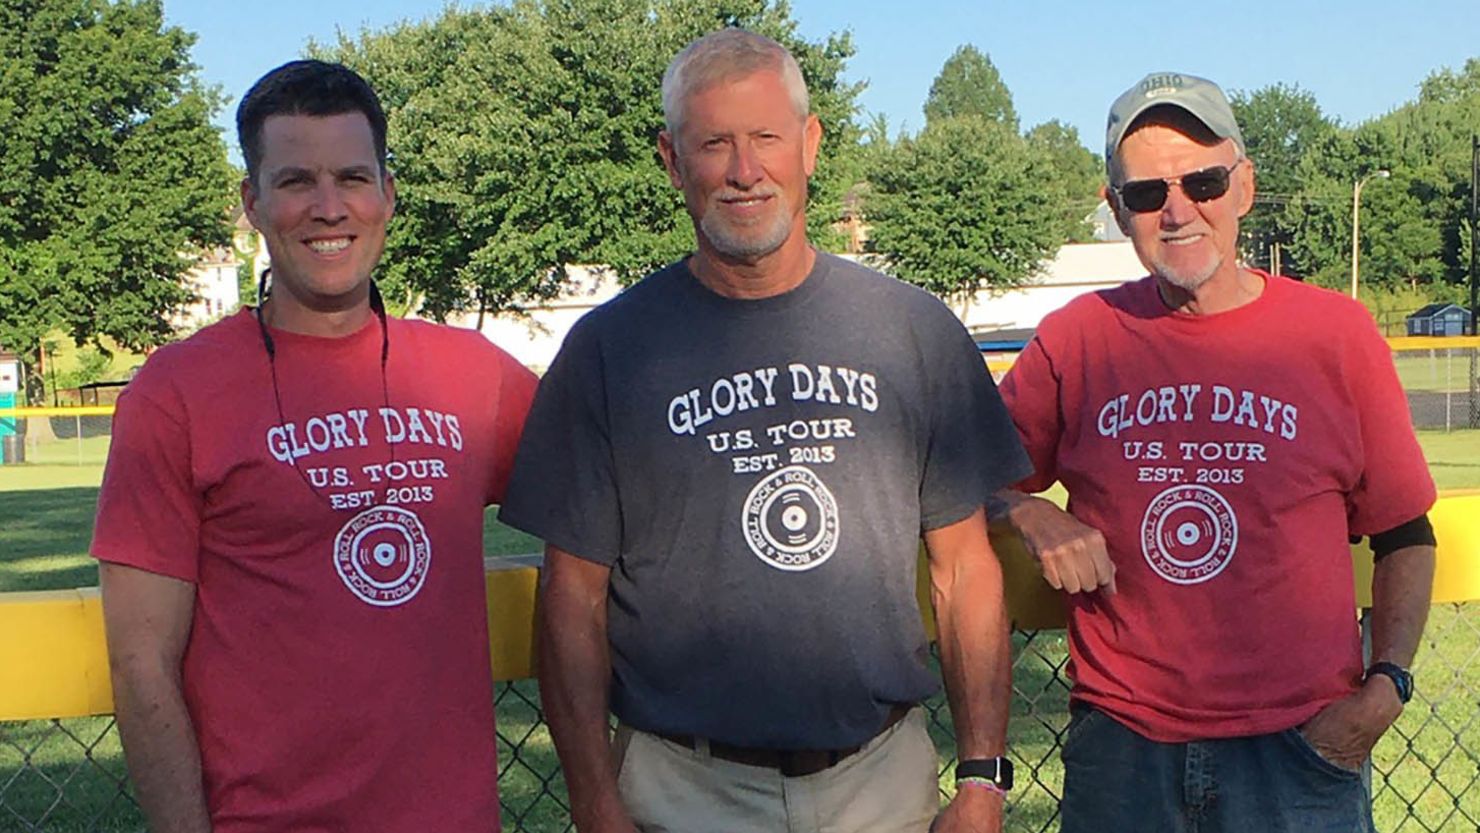 Eric Reed, left, his father-in-law, Bob Caldwell, center, and father, Ted Reed, wearing t-shirts that commemorate their annual Father's Day concert road trip.